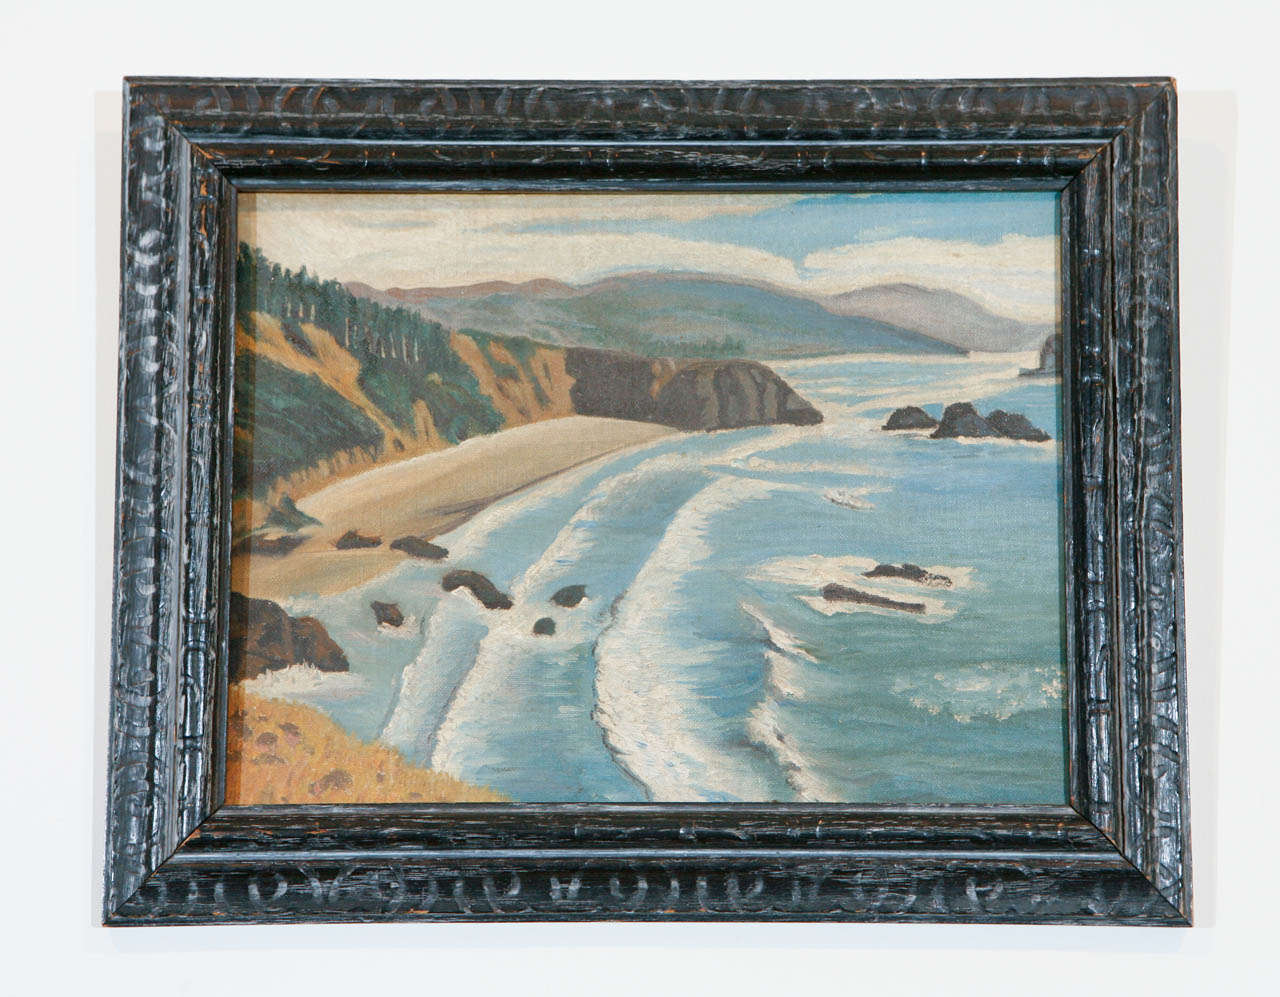 Small naive painting of (possibly) California coastline on artist's board, circa 1930.  Signed in red in lower left corner J. Glynn.  Signature is covered by frame which is likely not the original for this painting, but is an appropriate age and